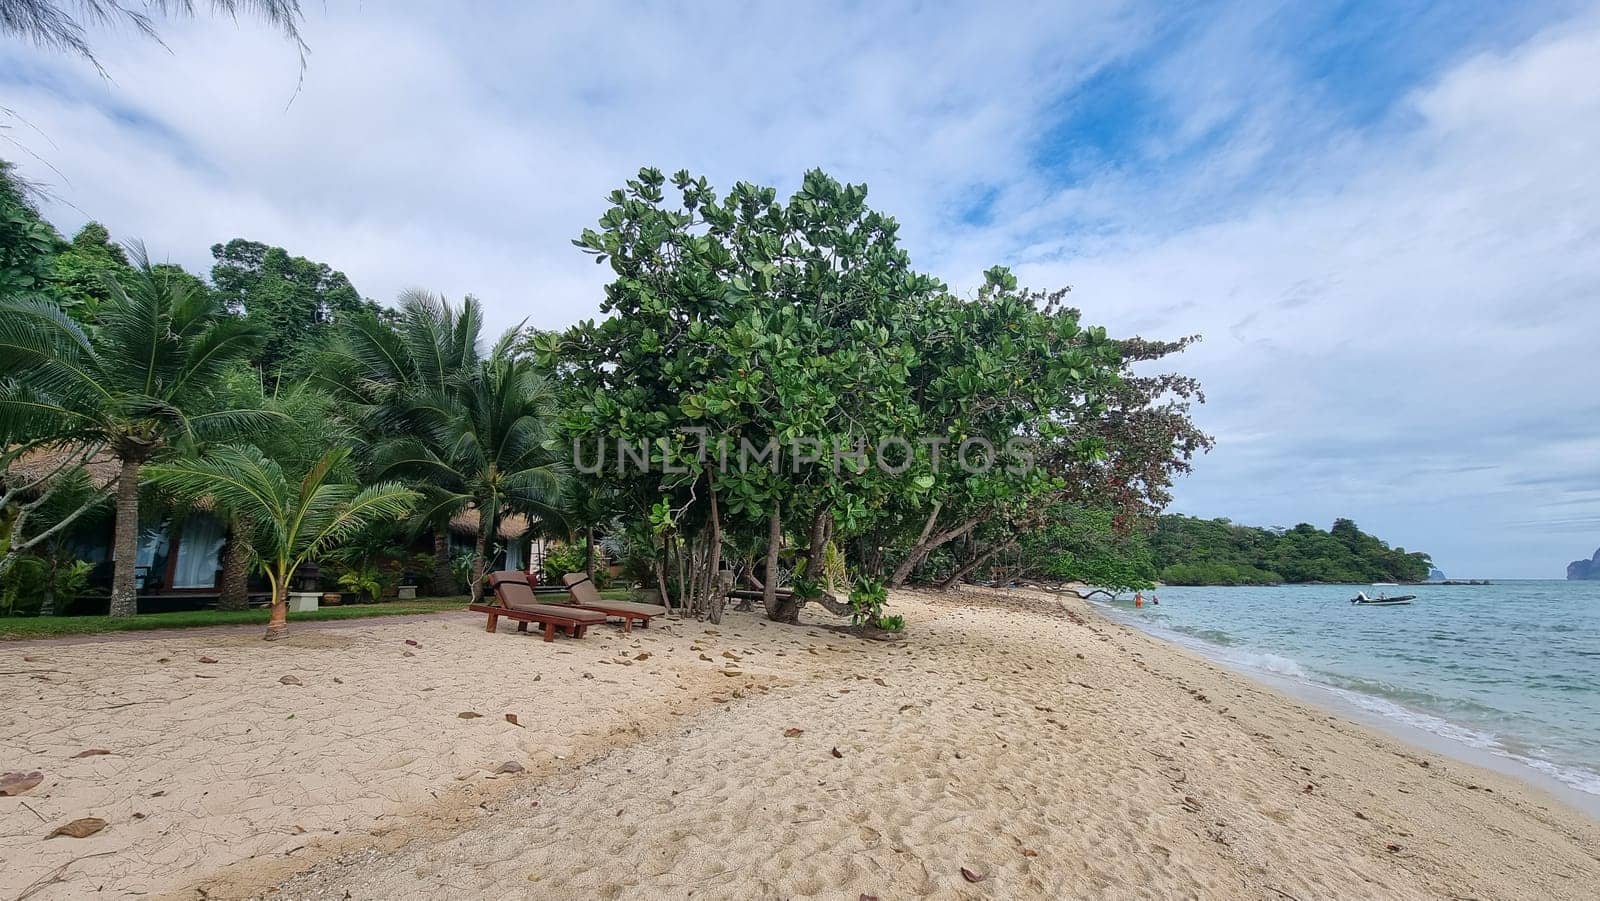 A tranquil sandy beach lined with lush trees and a charming house in the background under clear blue skies by fokkebok